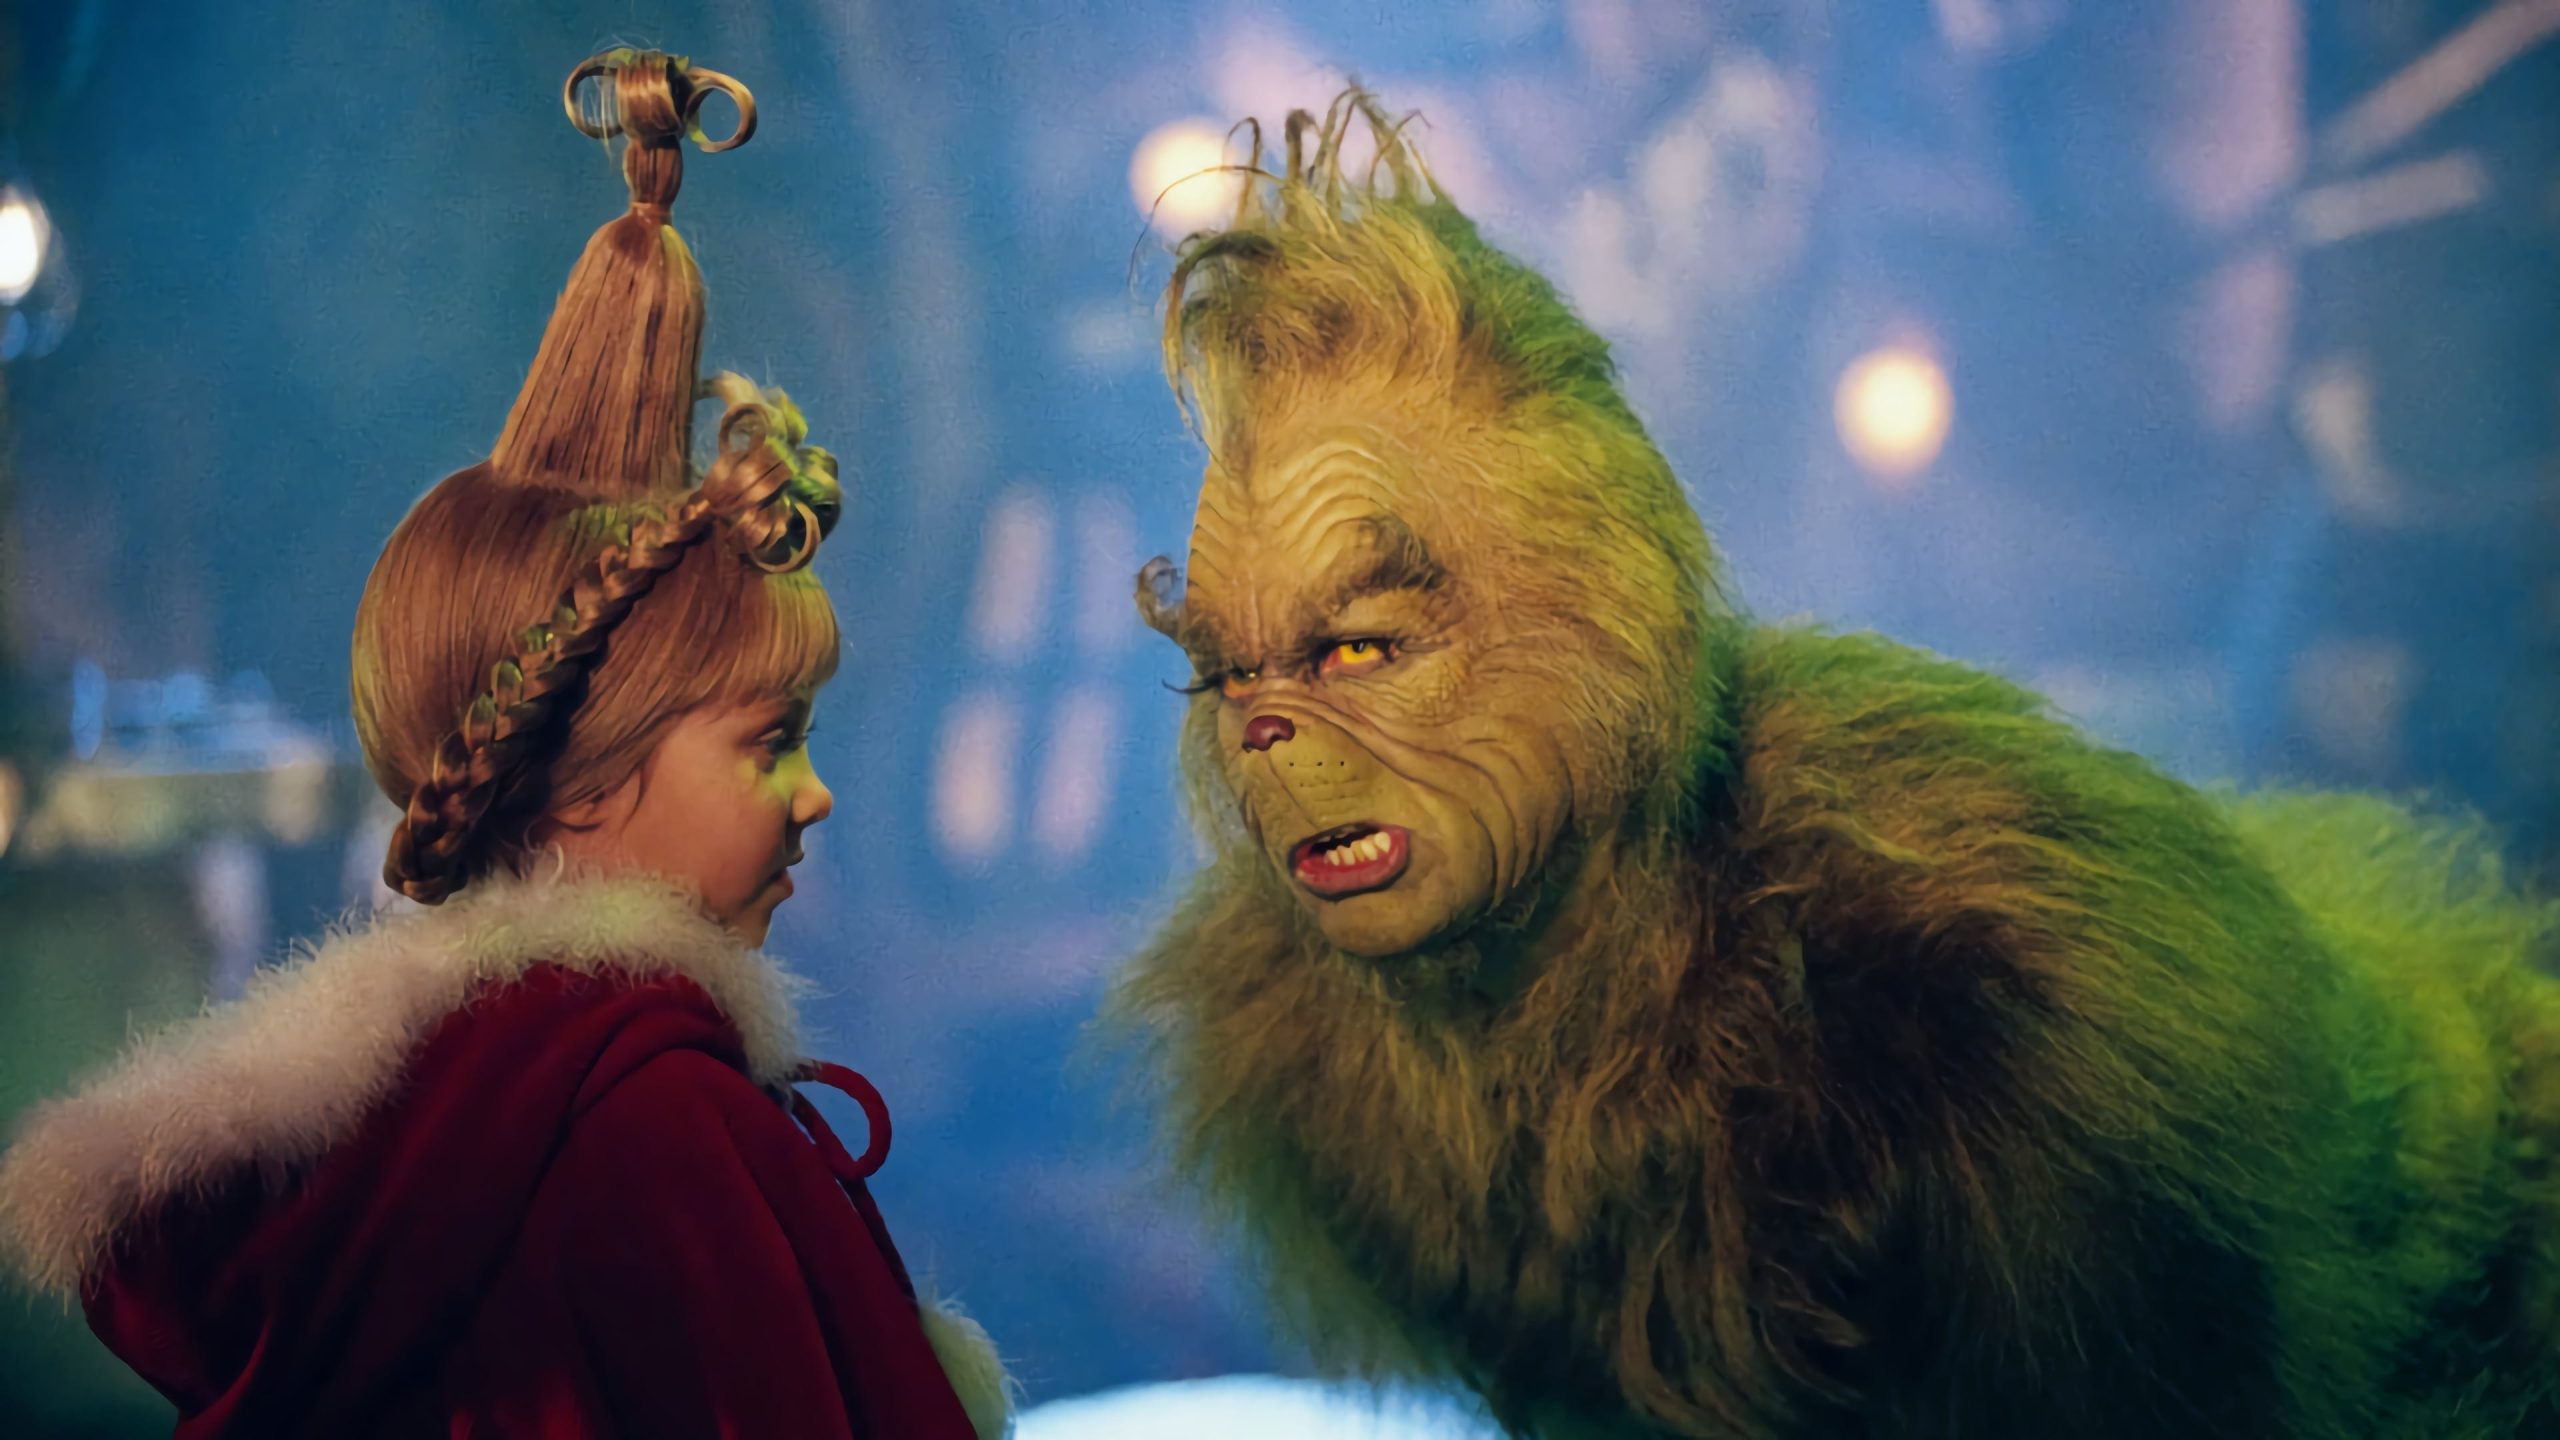 Exciting Buzz Is Jim Carrey Ready to Reprise His Role in a New 'The Grinch' Sequel